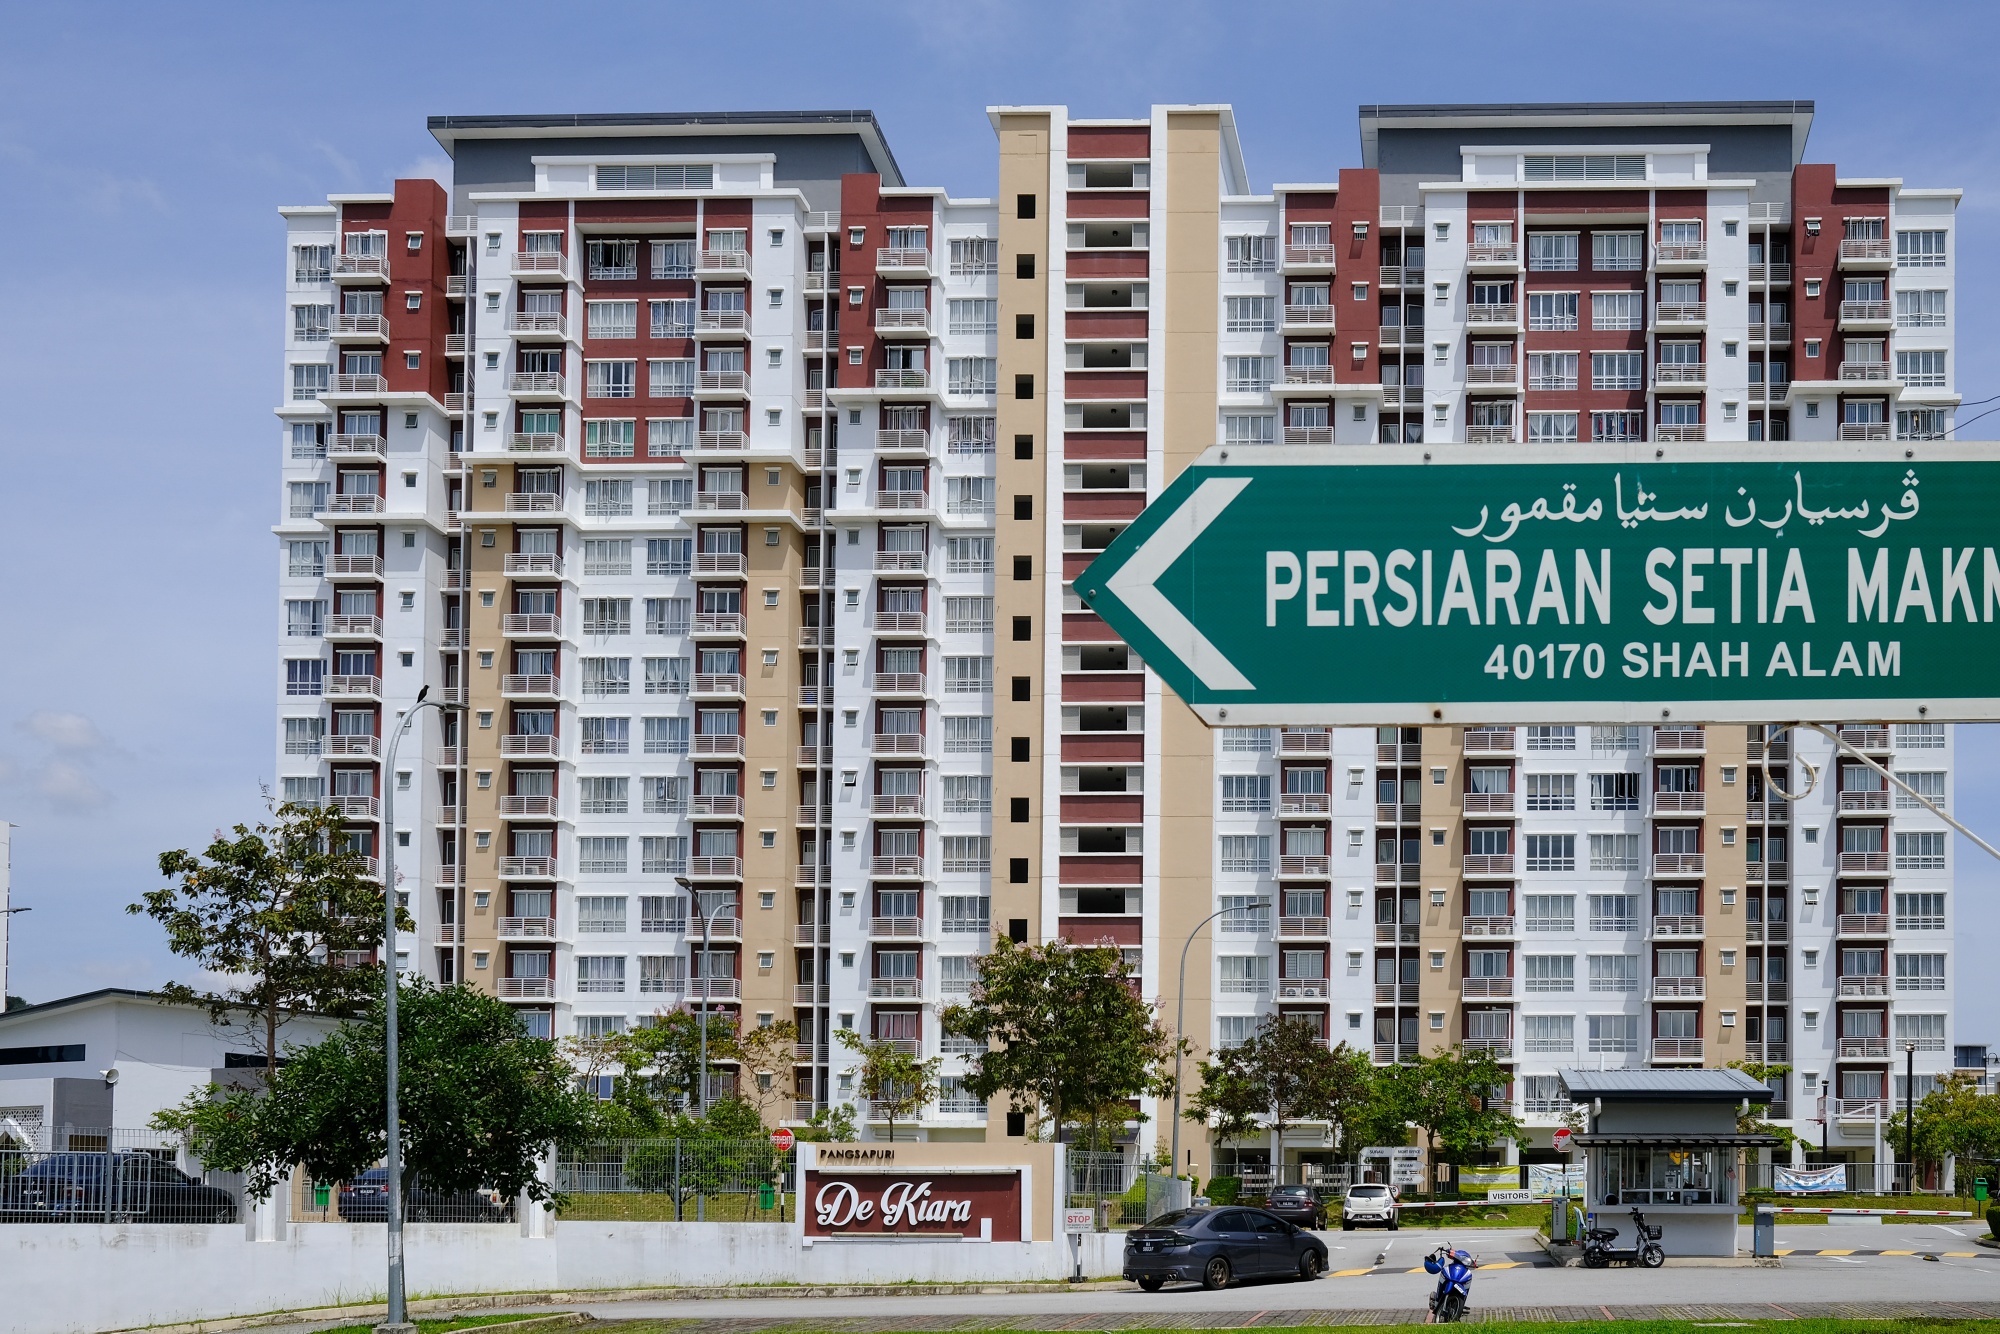 An apartment complex in Setia Alam district in Shah Alam, Malaysia.